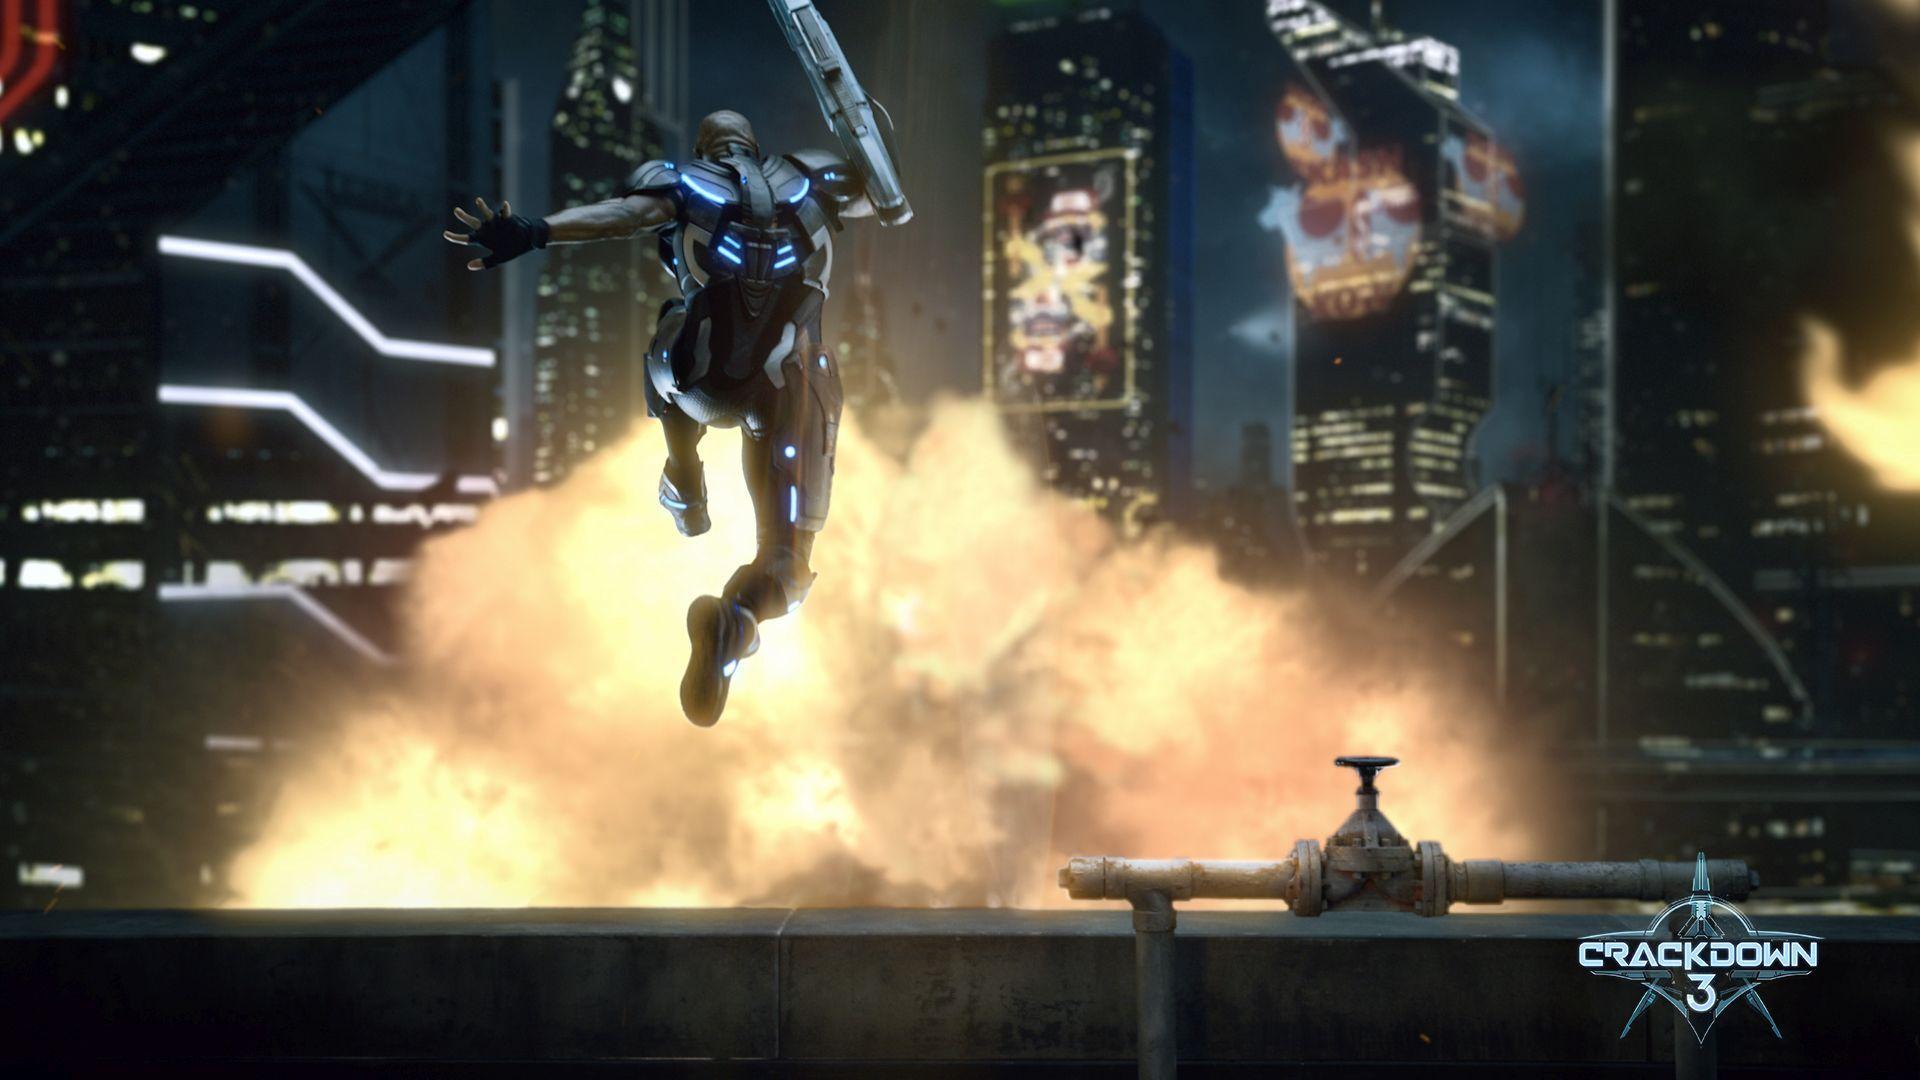 Crackdown 3 could be the best superhero game on PC